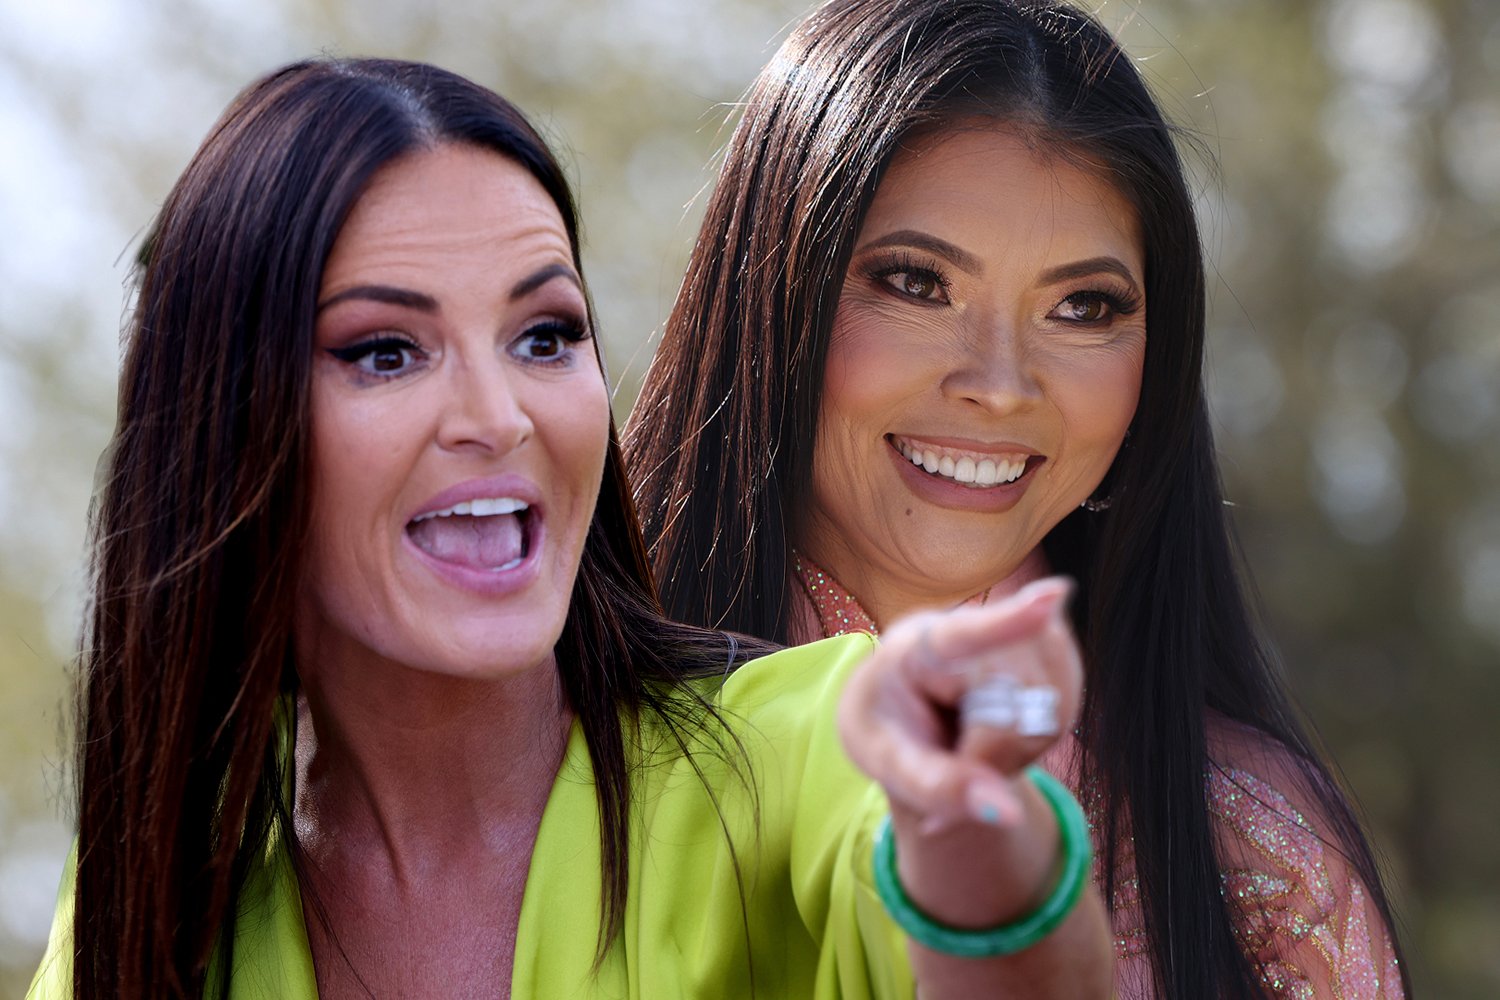 Lisa Barlow pointing in a scene of 'RHOSLC' and Jennie Nguyen smiling in another scene of the show